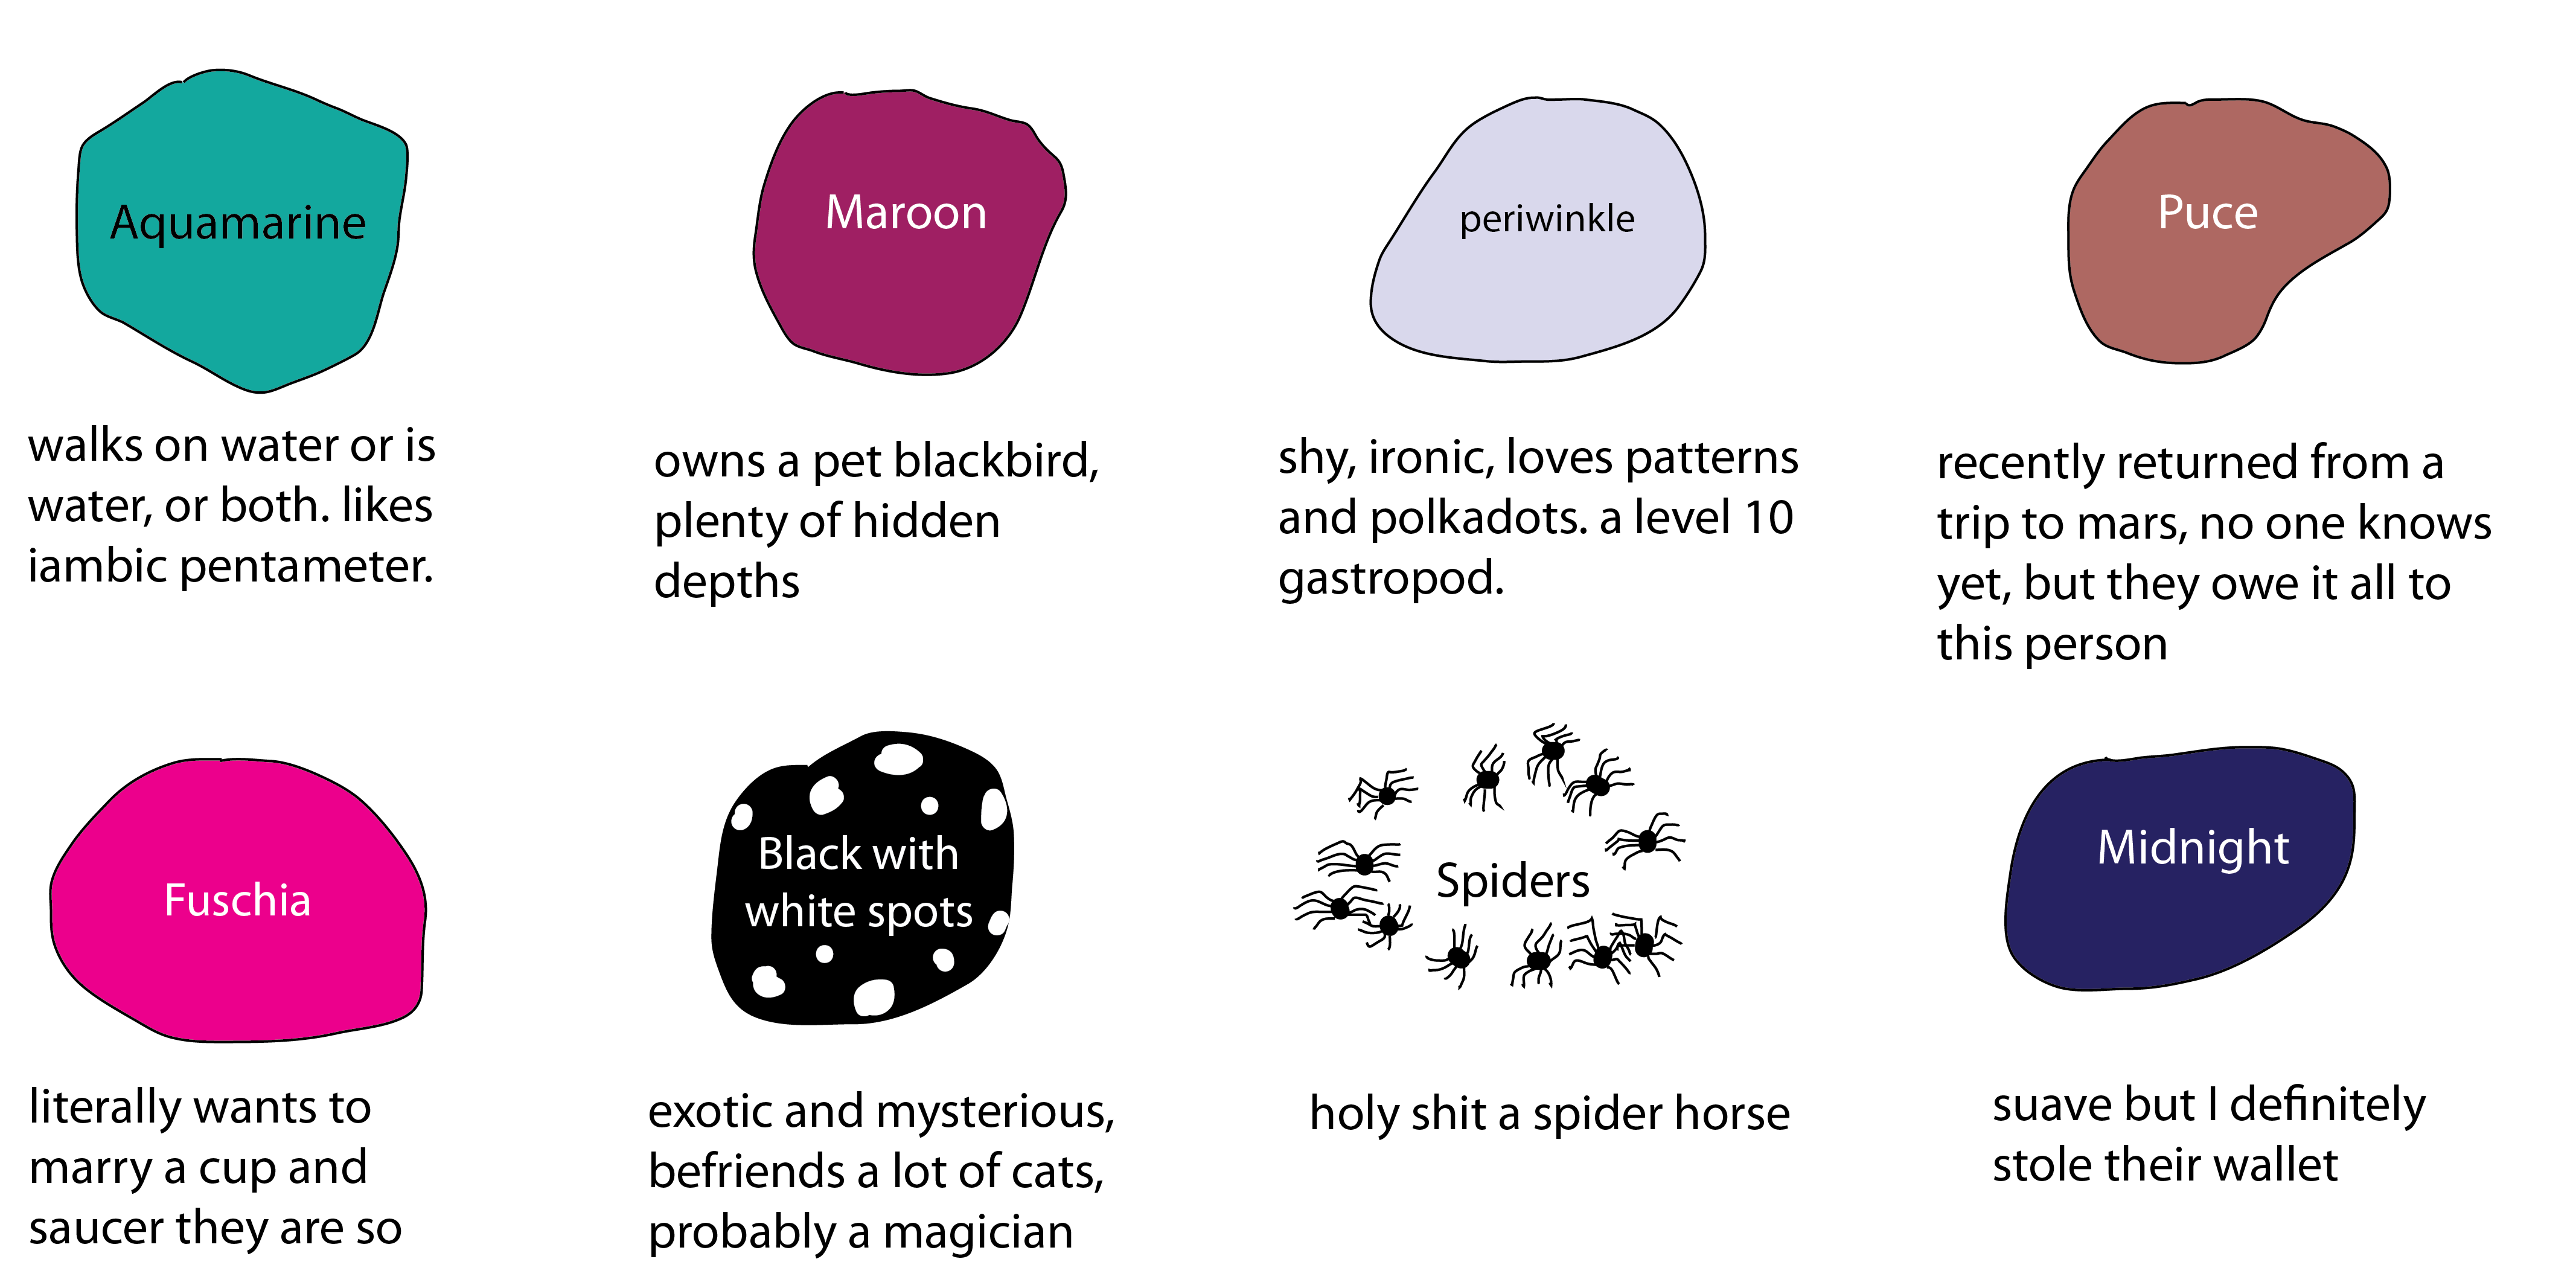 black with white dots - exotic and mysterious, befriends a lot of cats, probably a magician like his mother  spiders - holy shit a spider horse  aquamarine - walks on water or is water, or both. likes iambic pentameter.  maroon - owns a pet blackbird, plenty of hidden depths  fuschia - literally wants to marry a cup and saucer they are so stylish  .  puce - recently returned from a trip to mars, no one knows yet, but they owe it all to this person  periwinkle - shy, ironic, loves patterns and polkadots. a level 10 gastropod.  midnight - suave but I definitely stole their wallet